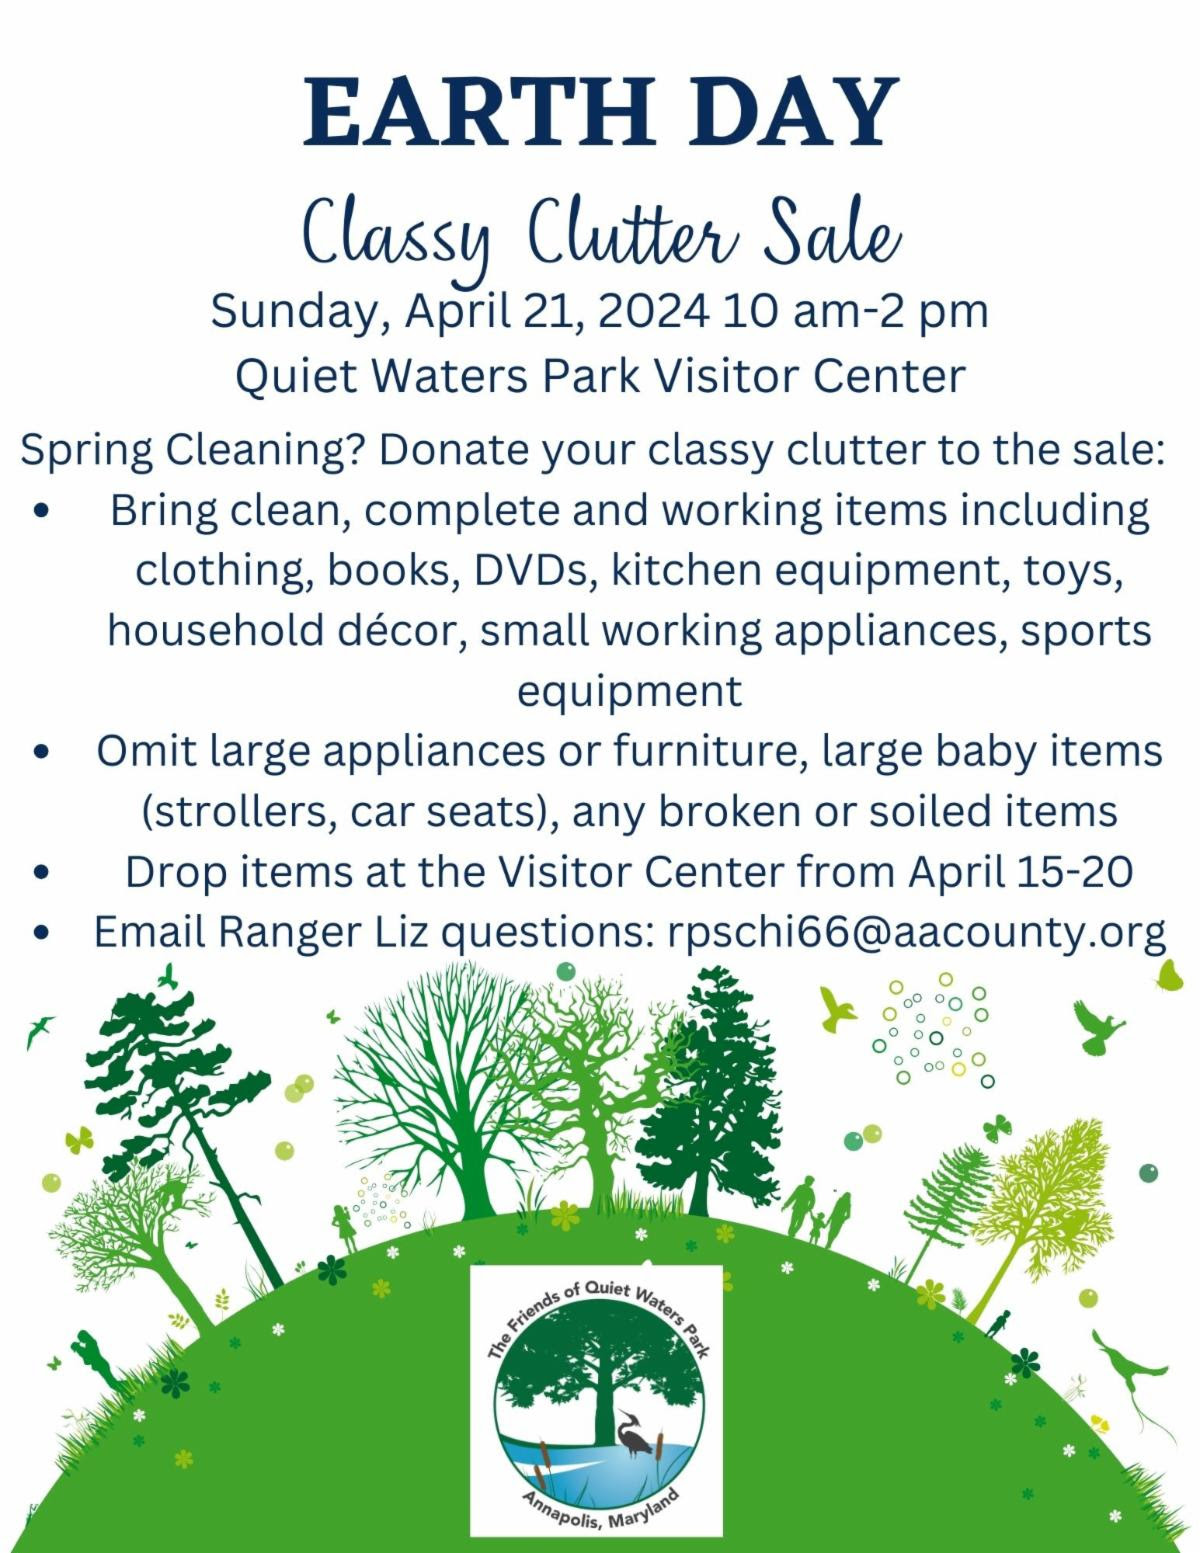 Earth Day Classy Clutter Sale 2024 @ Visitors Center